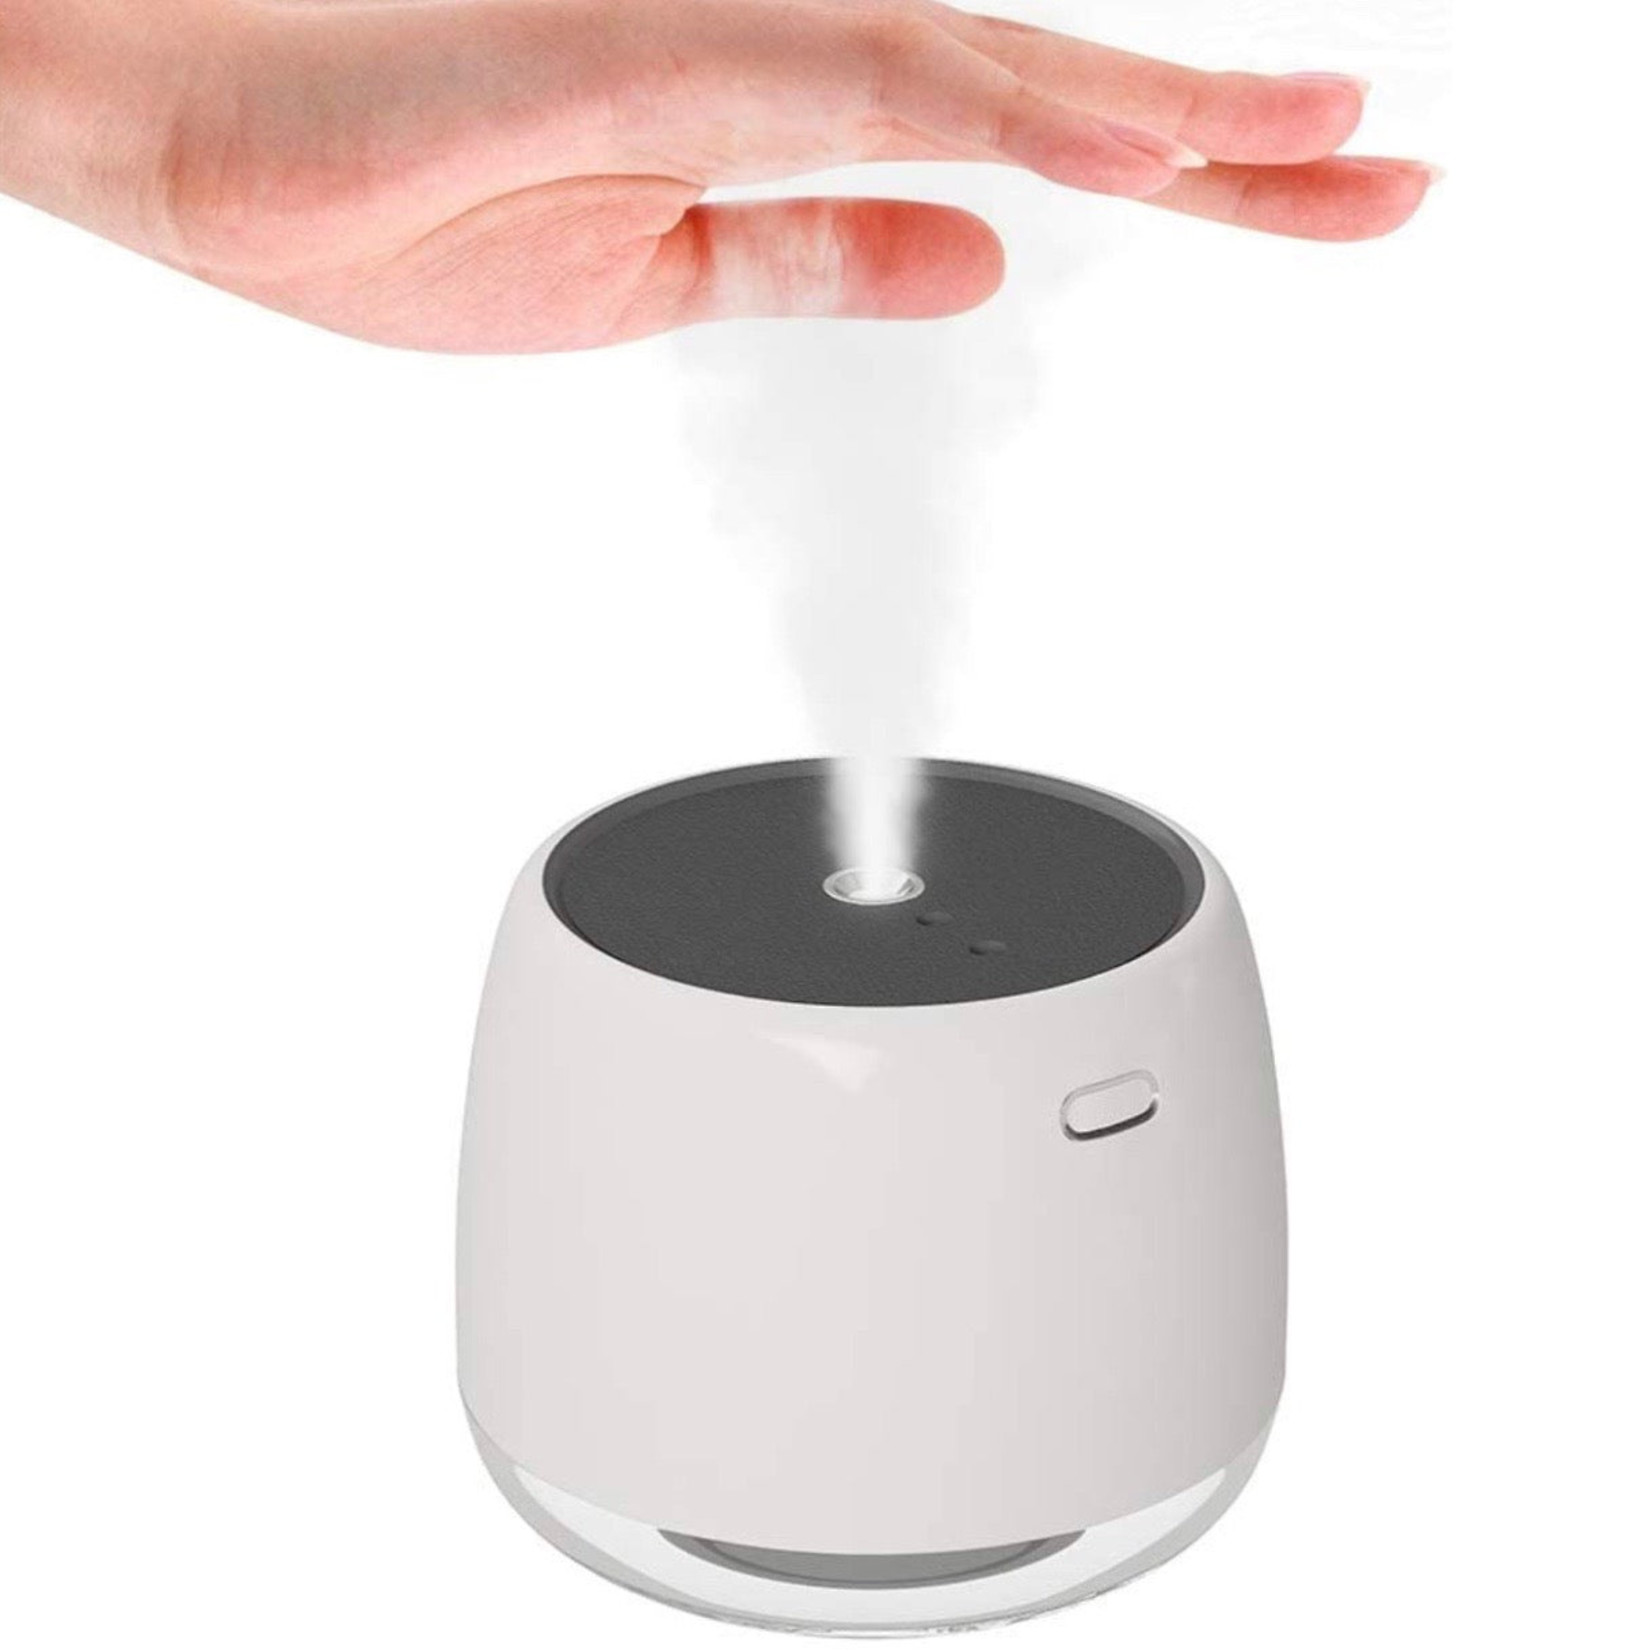 SnappyScreen Touchless Mist Sanitizer